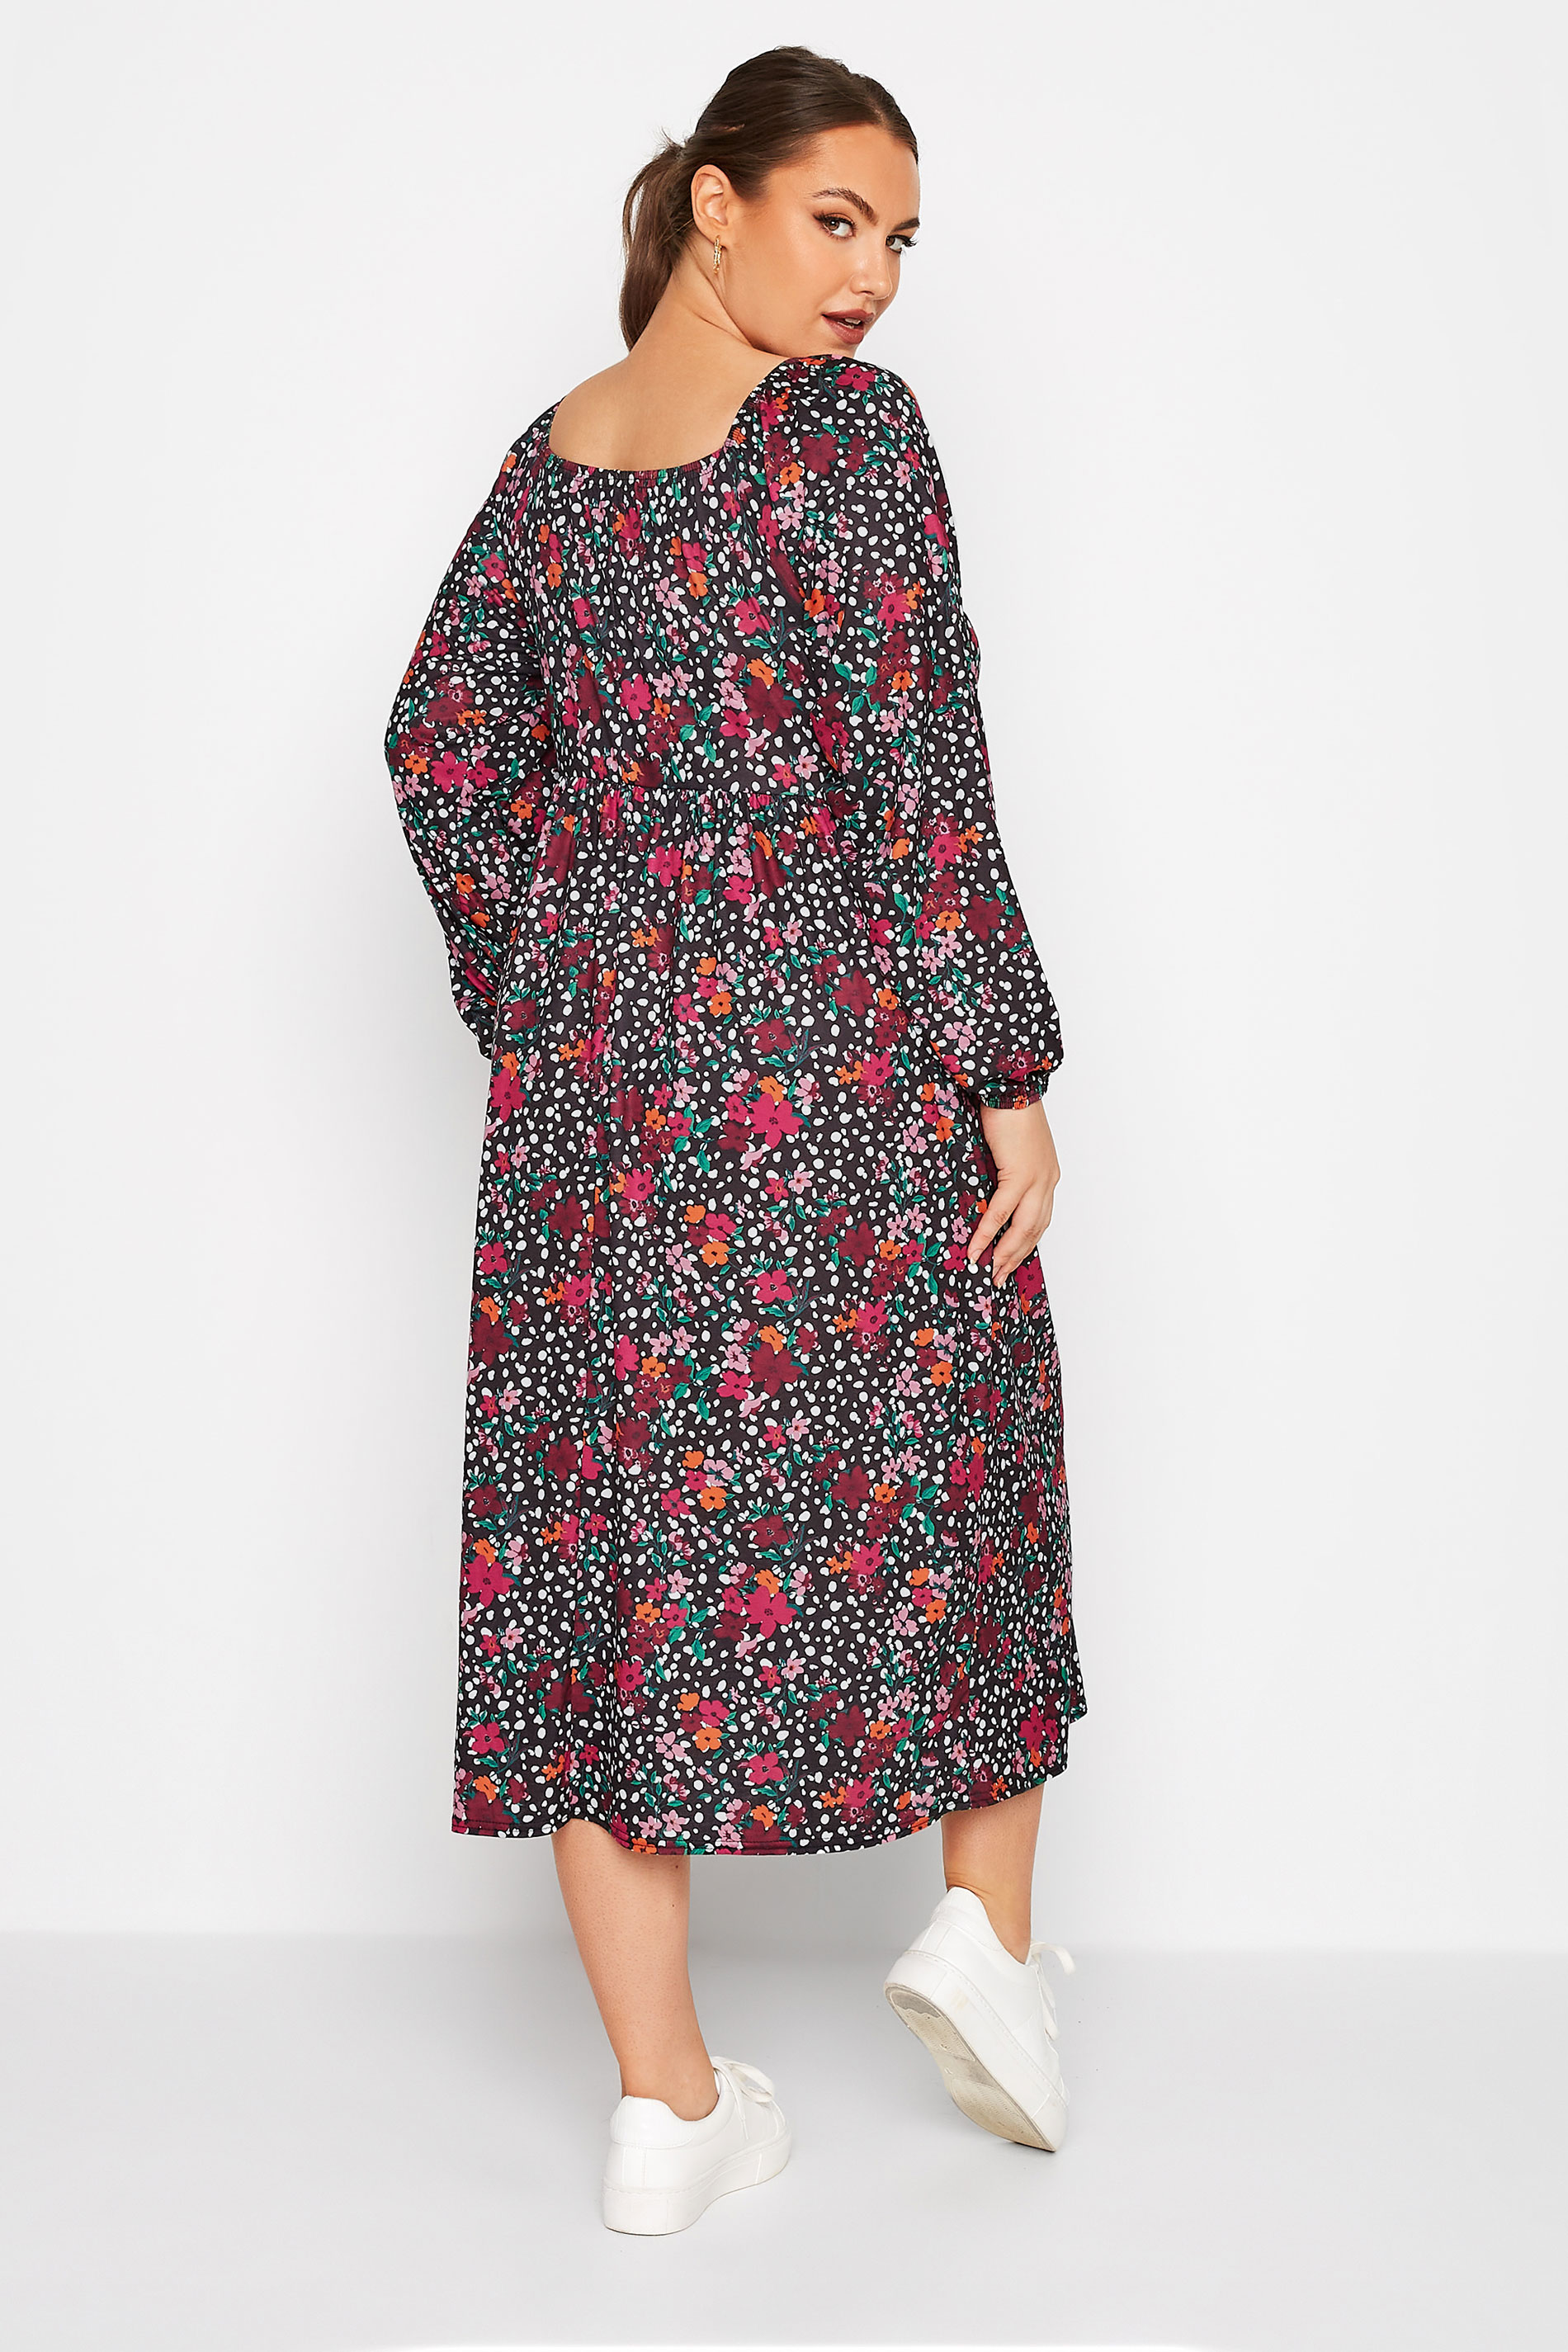 LIMITED COLLECTION Plus Size Black Floral Smock Dress | Yours Clothing  3